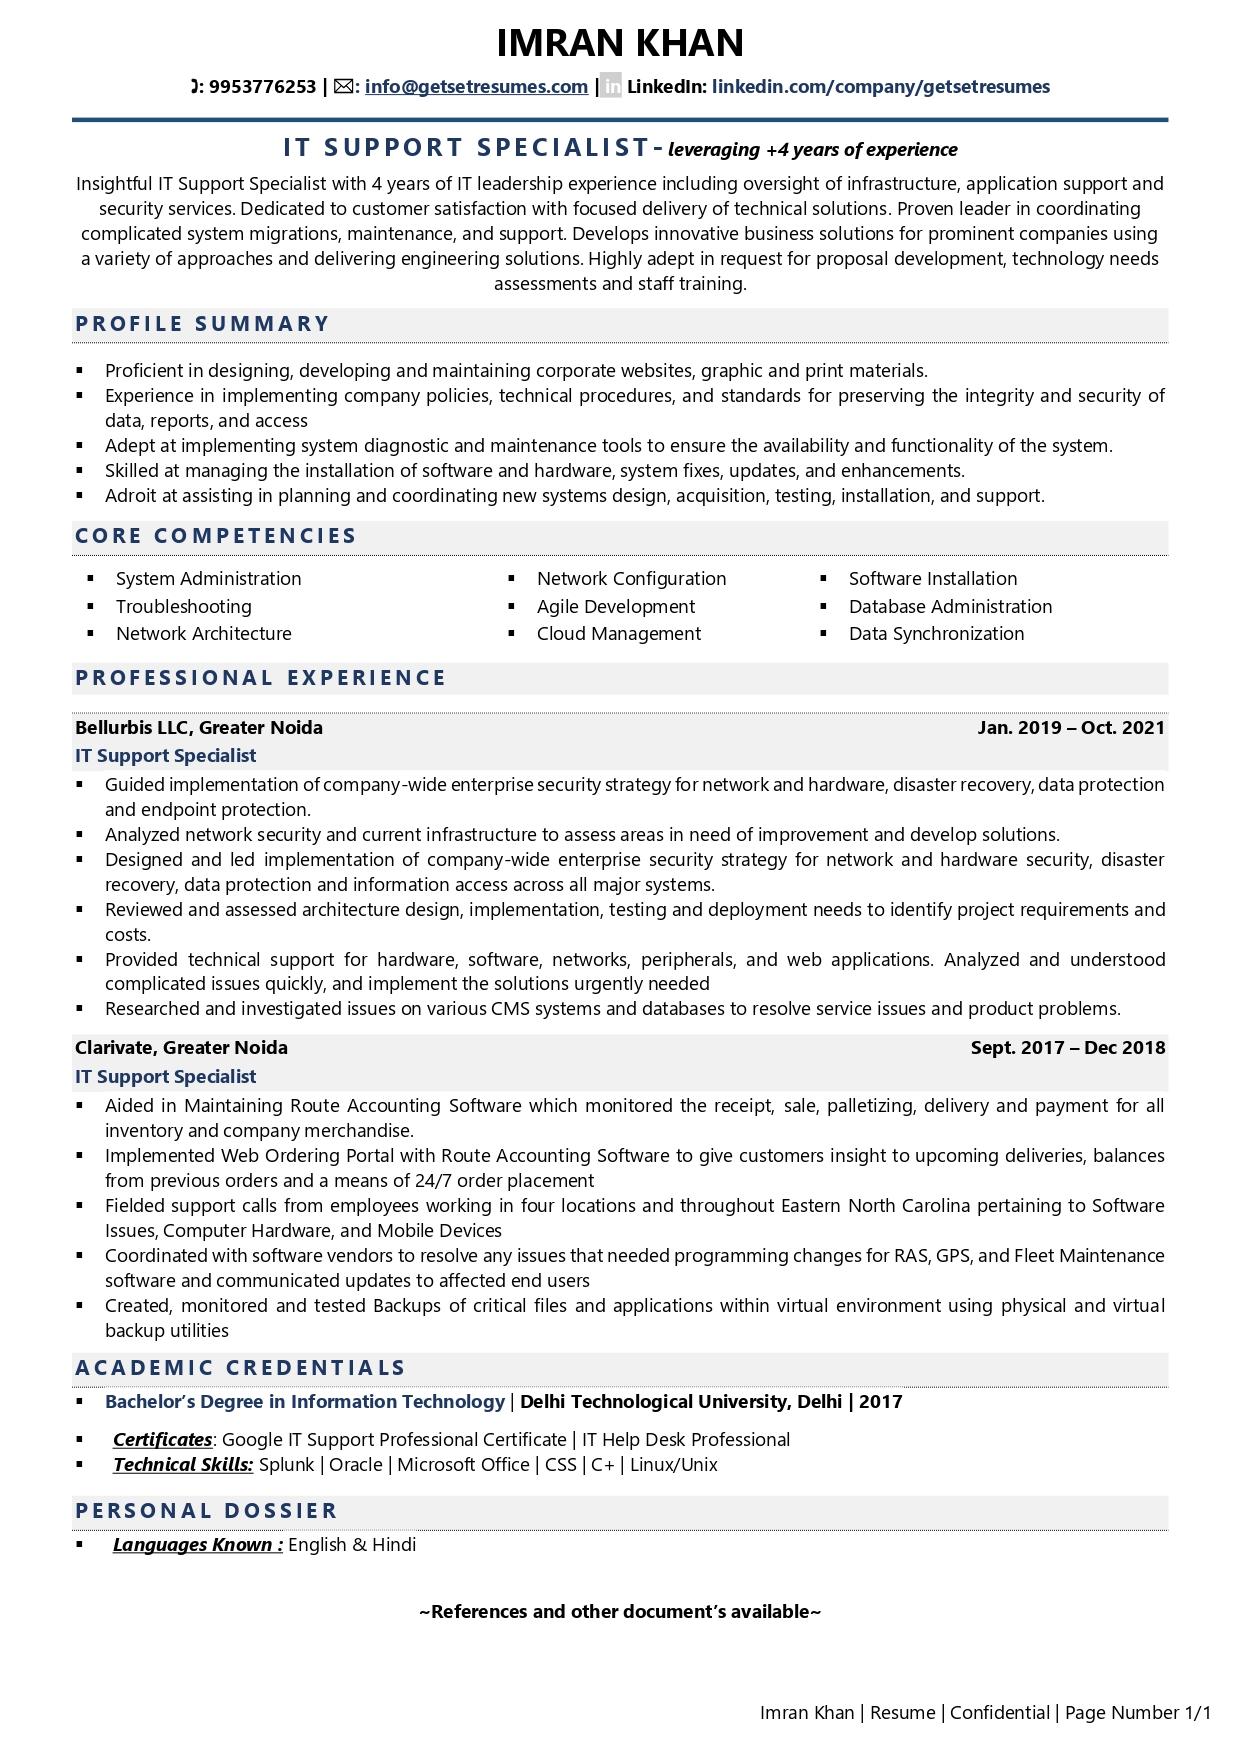 IT Support Specialist - Resume Example & Template